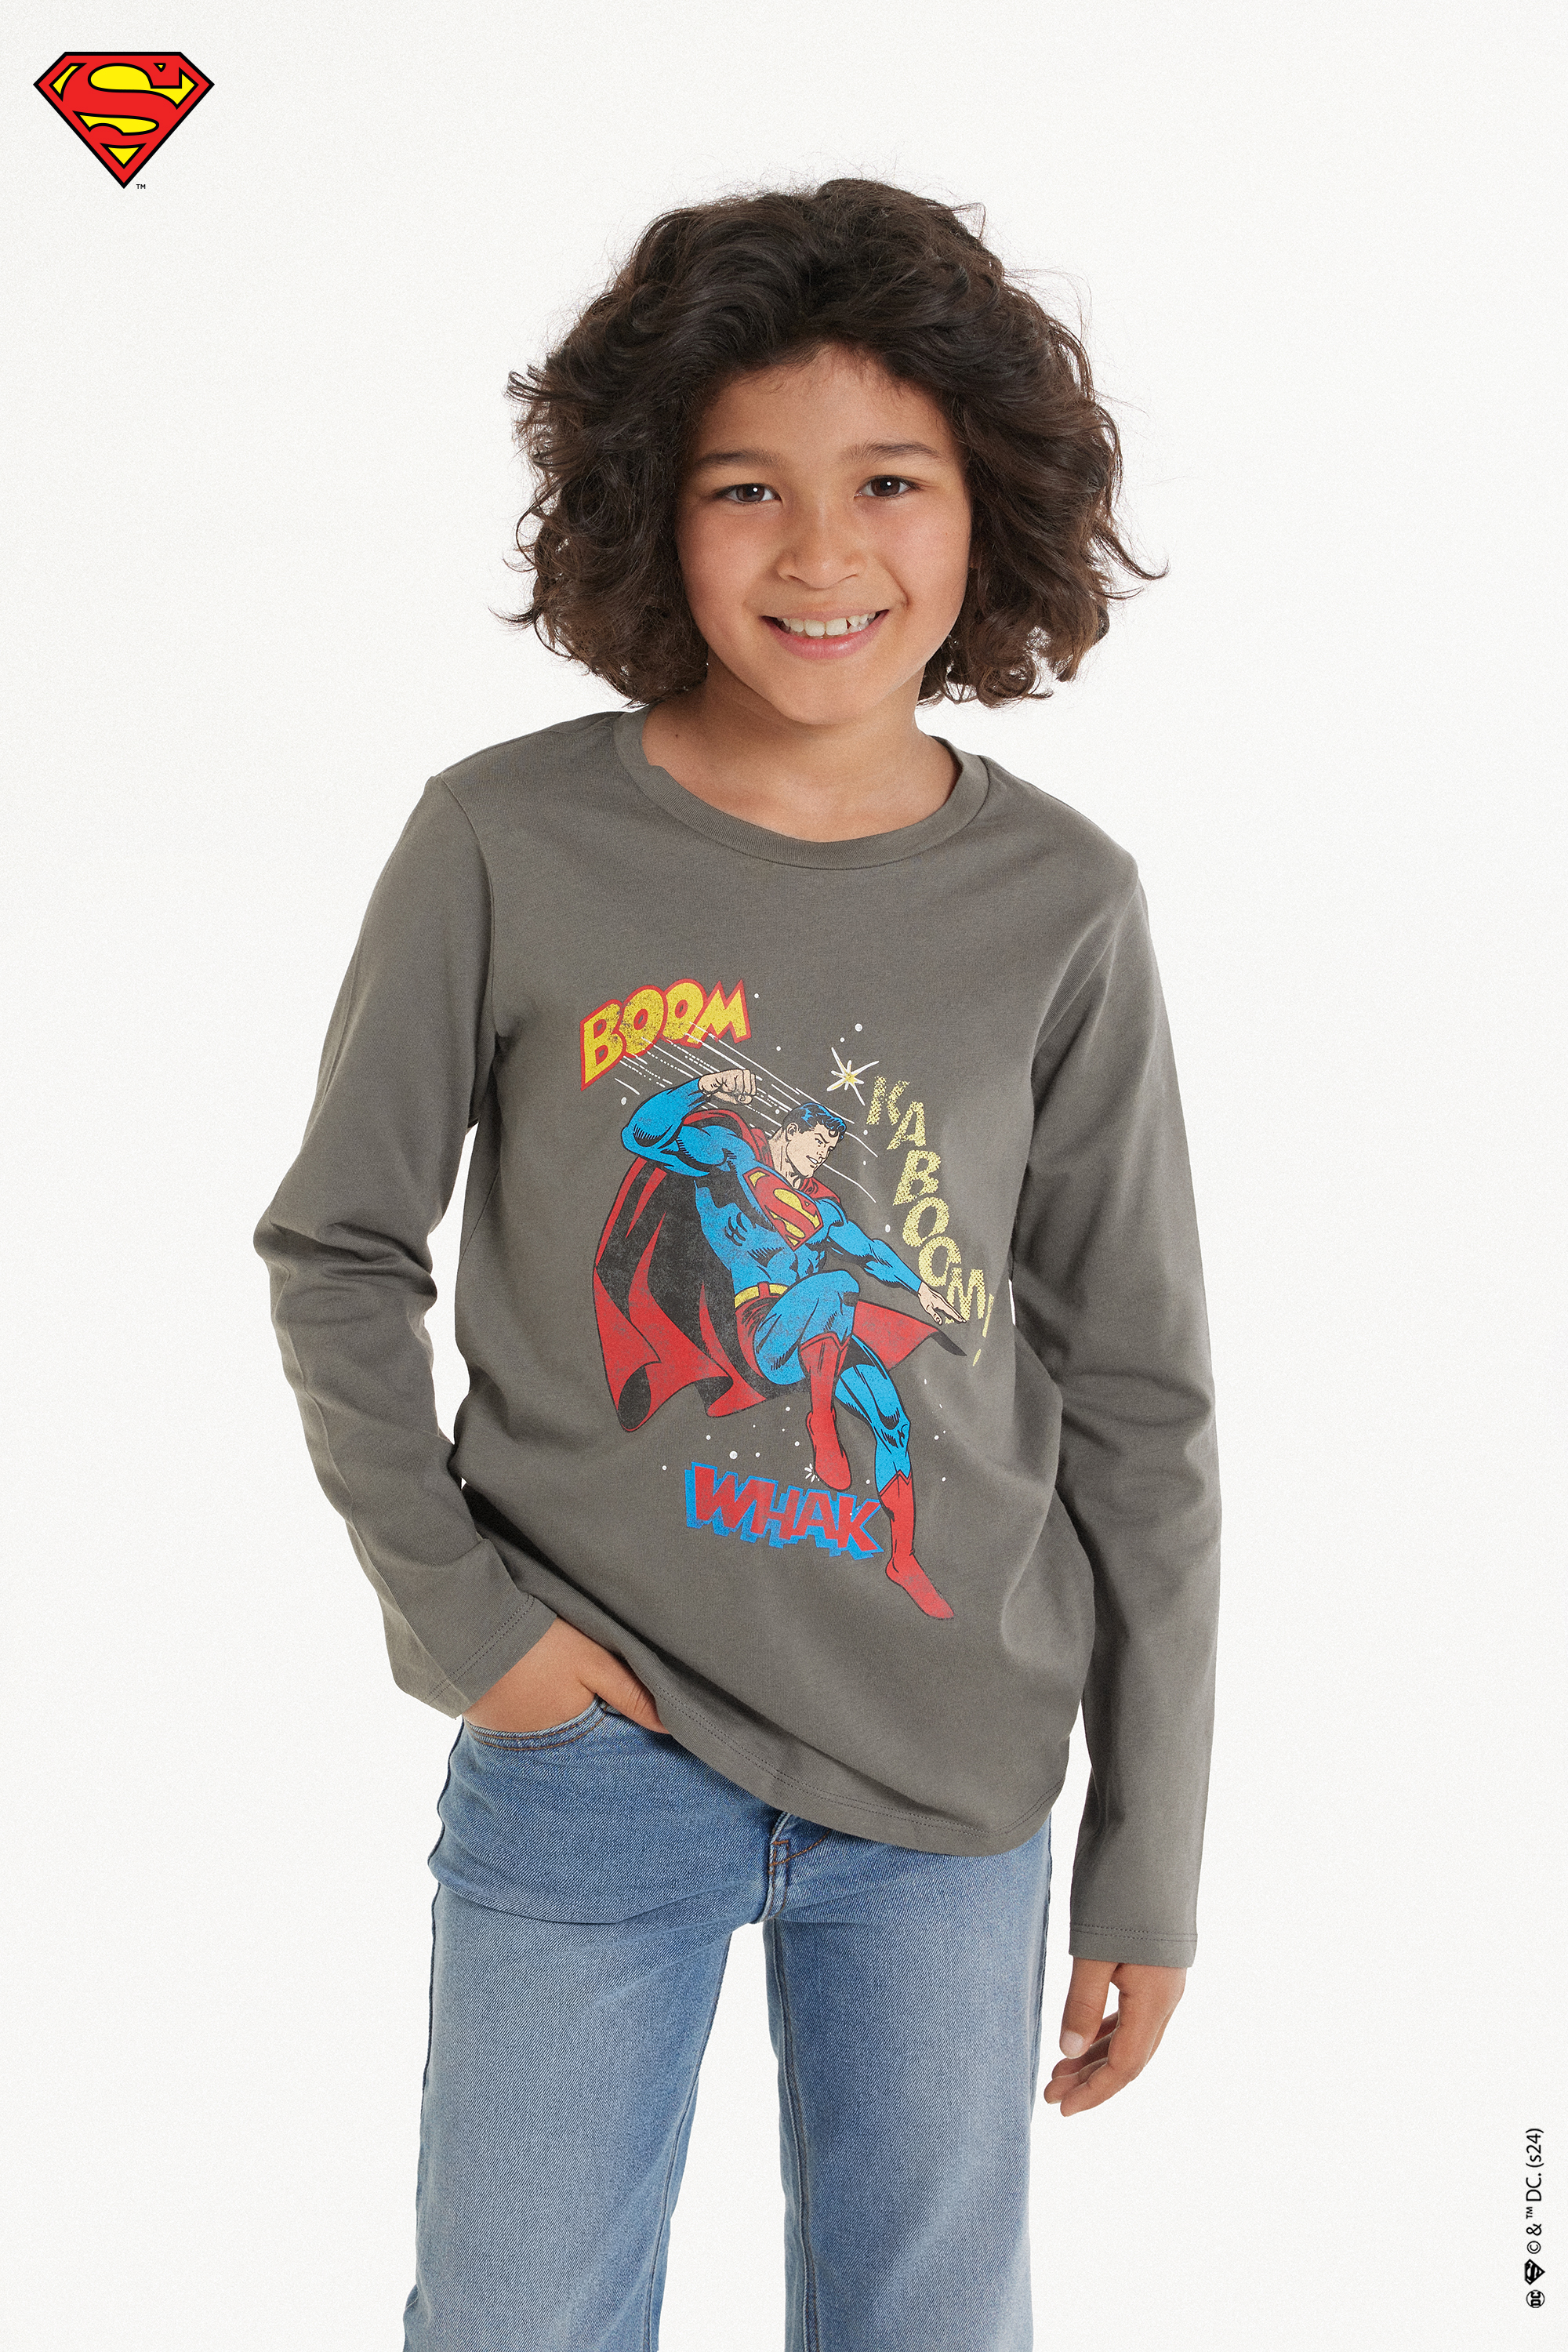 Boys’ Long-Sleeved Rounded-Neck Jersey with Superman Print